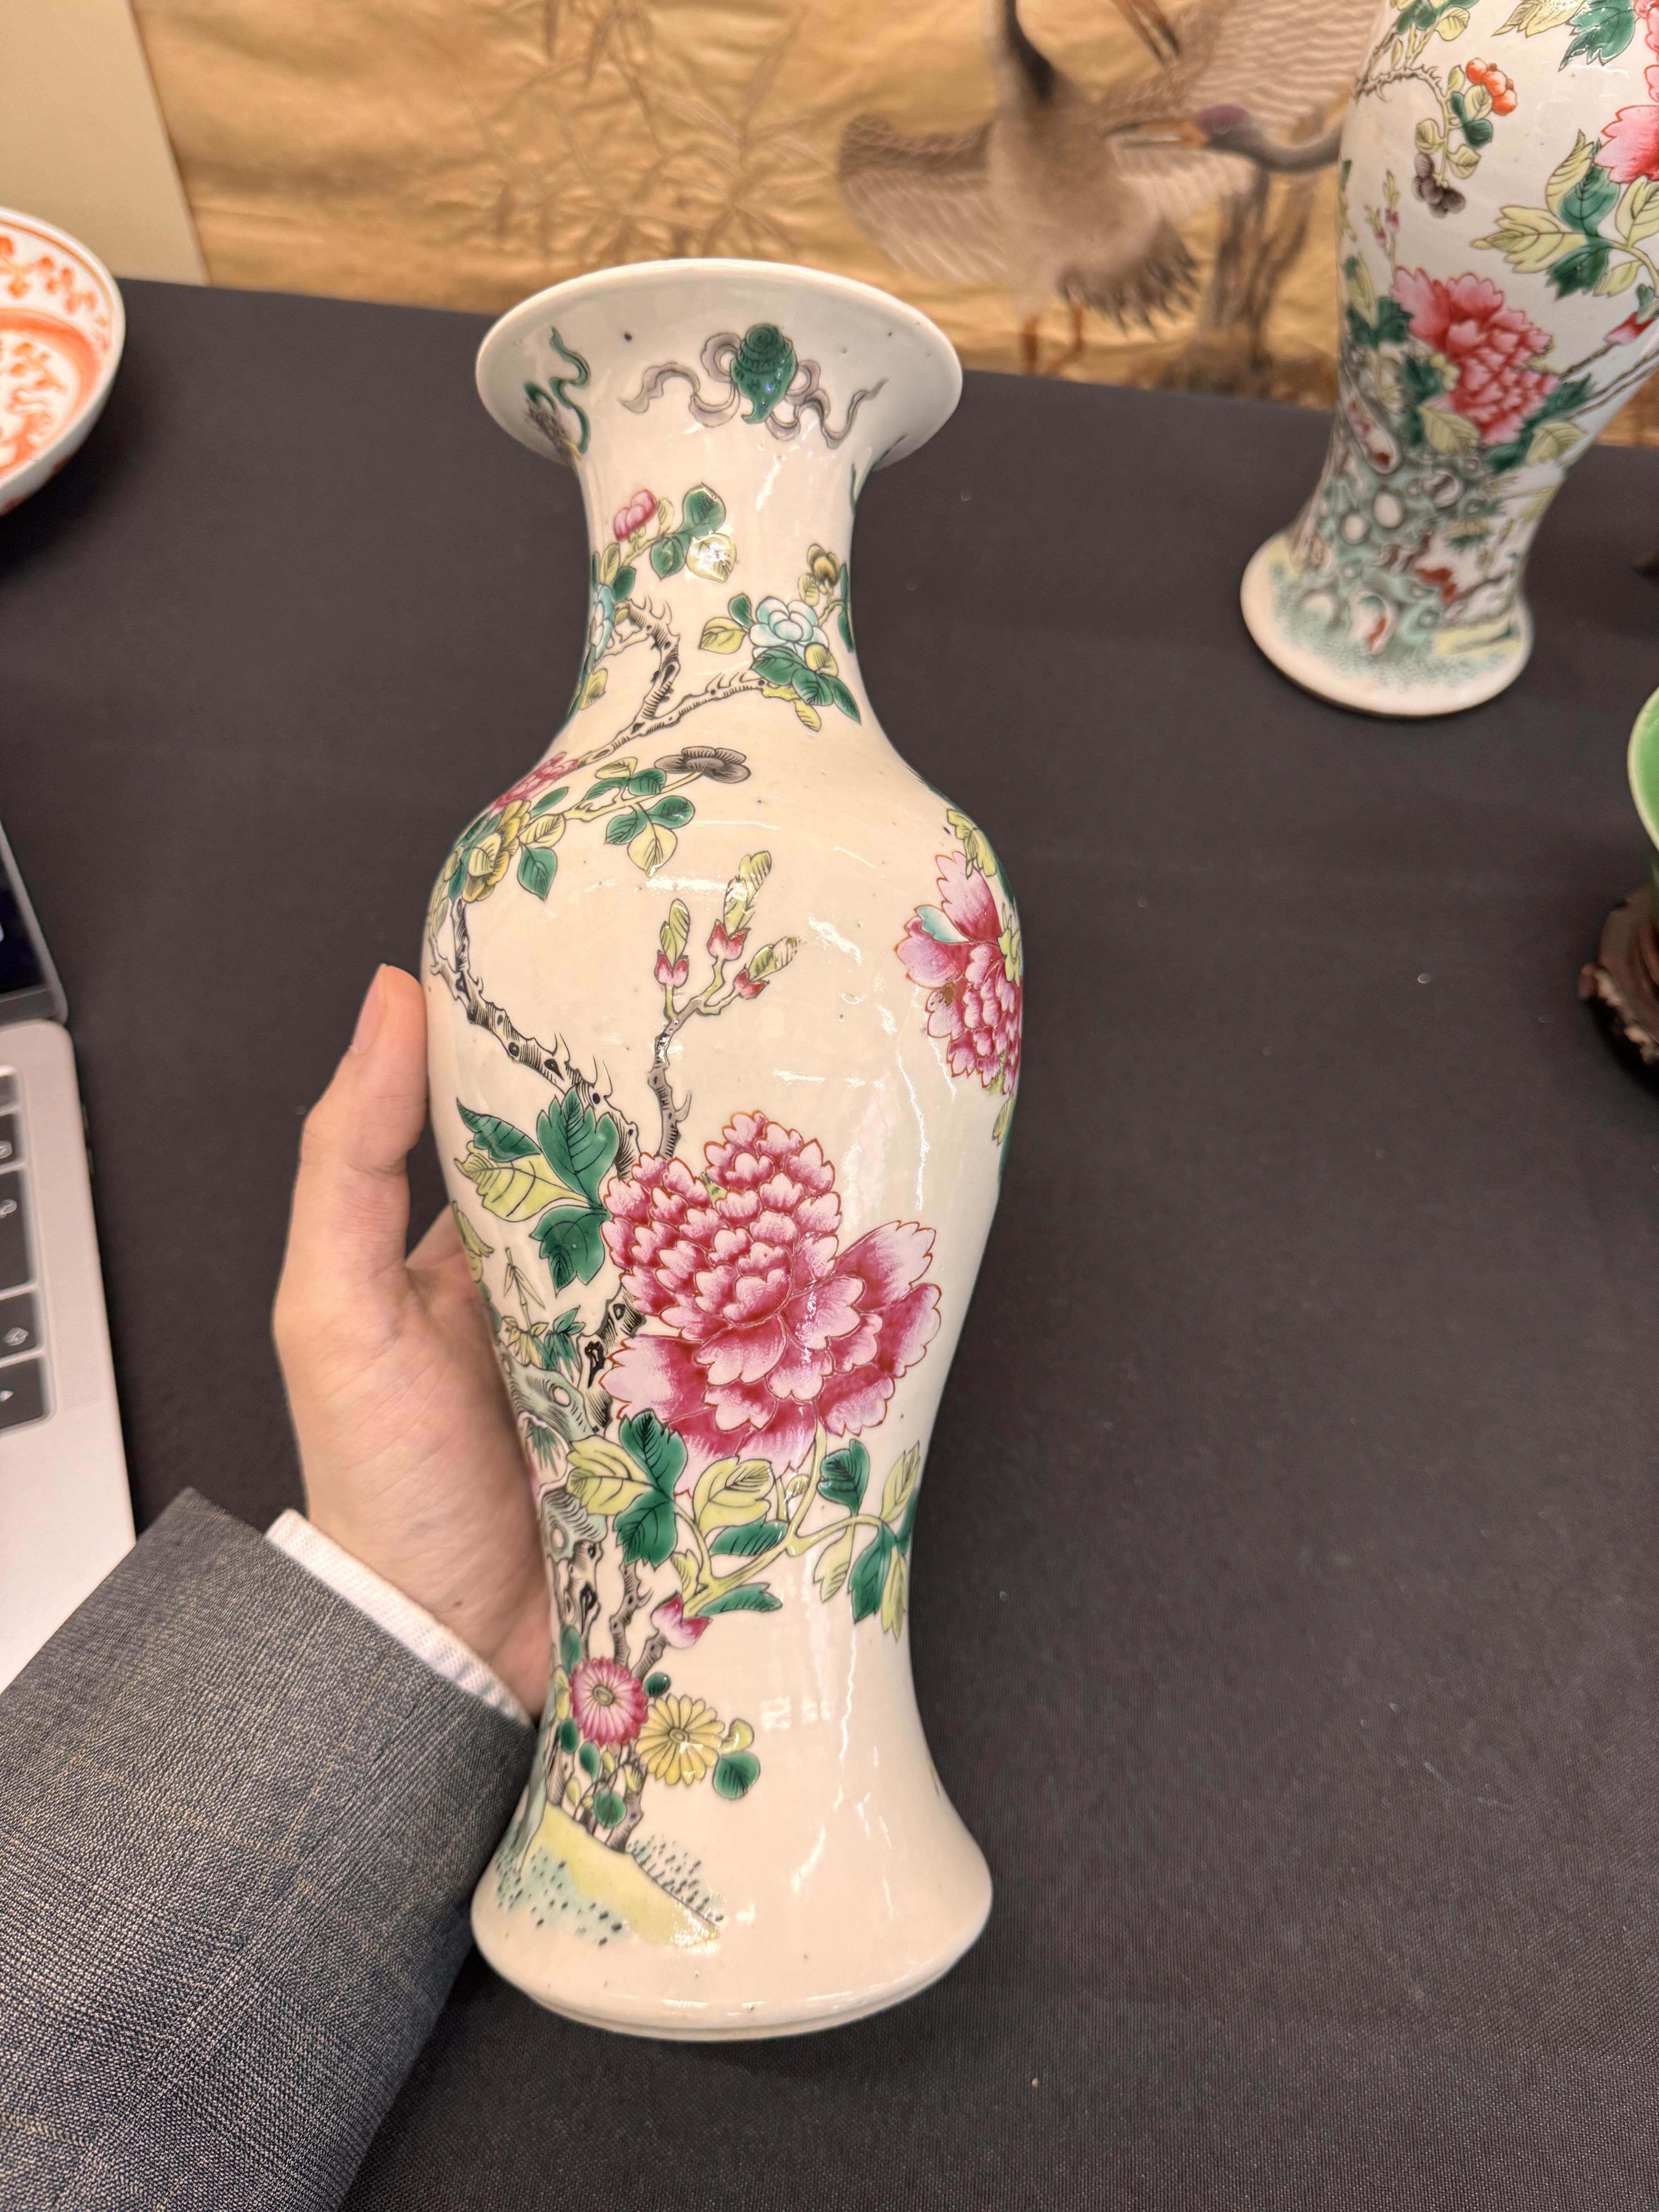 A PAIR OF CHINESE FAMILLE-ROSE 'PEONY' VASES 清 十九或二十世紀 粉彩牡丹紋瓶一對 - Image 18 of 19